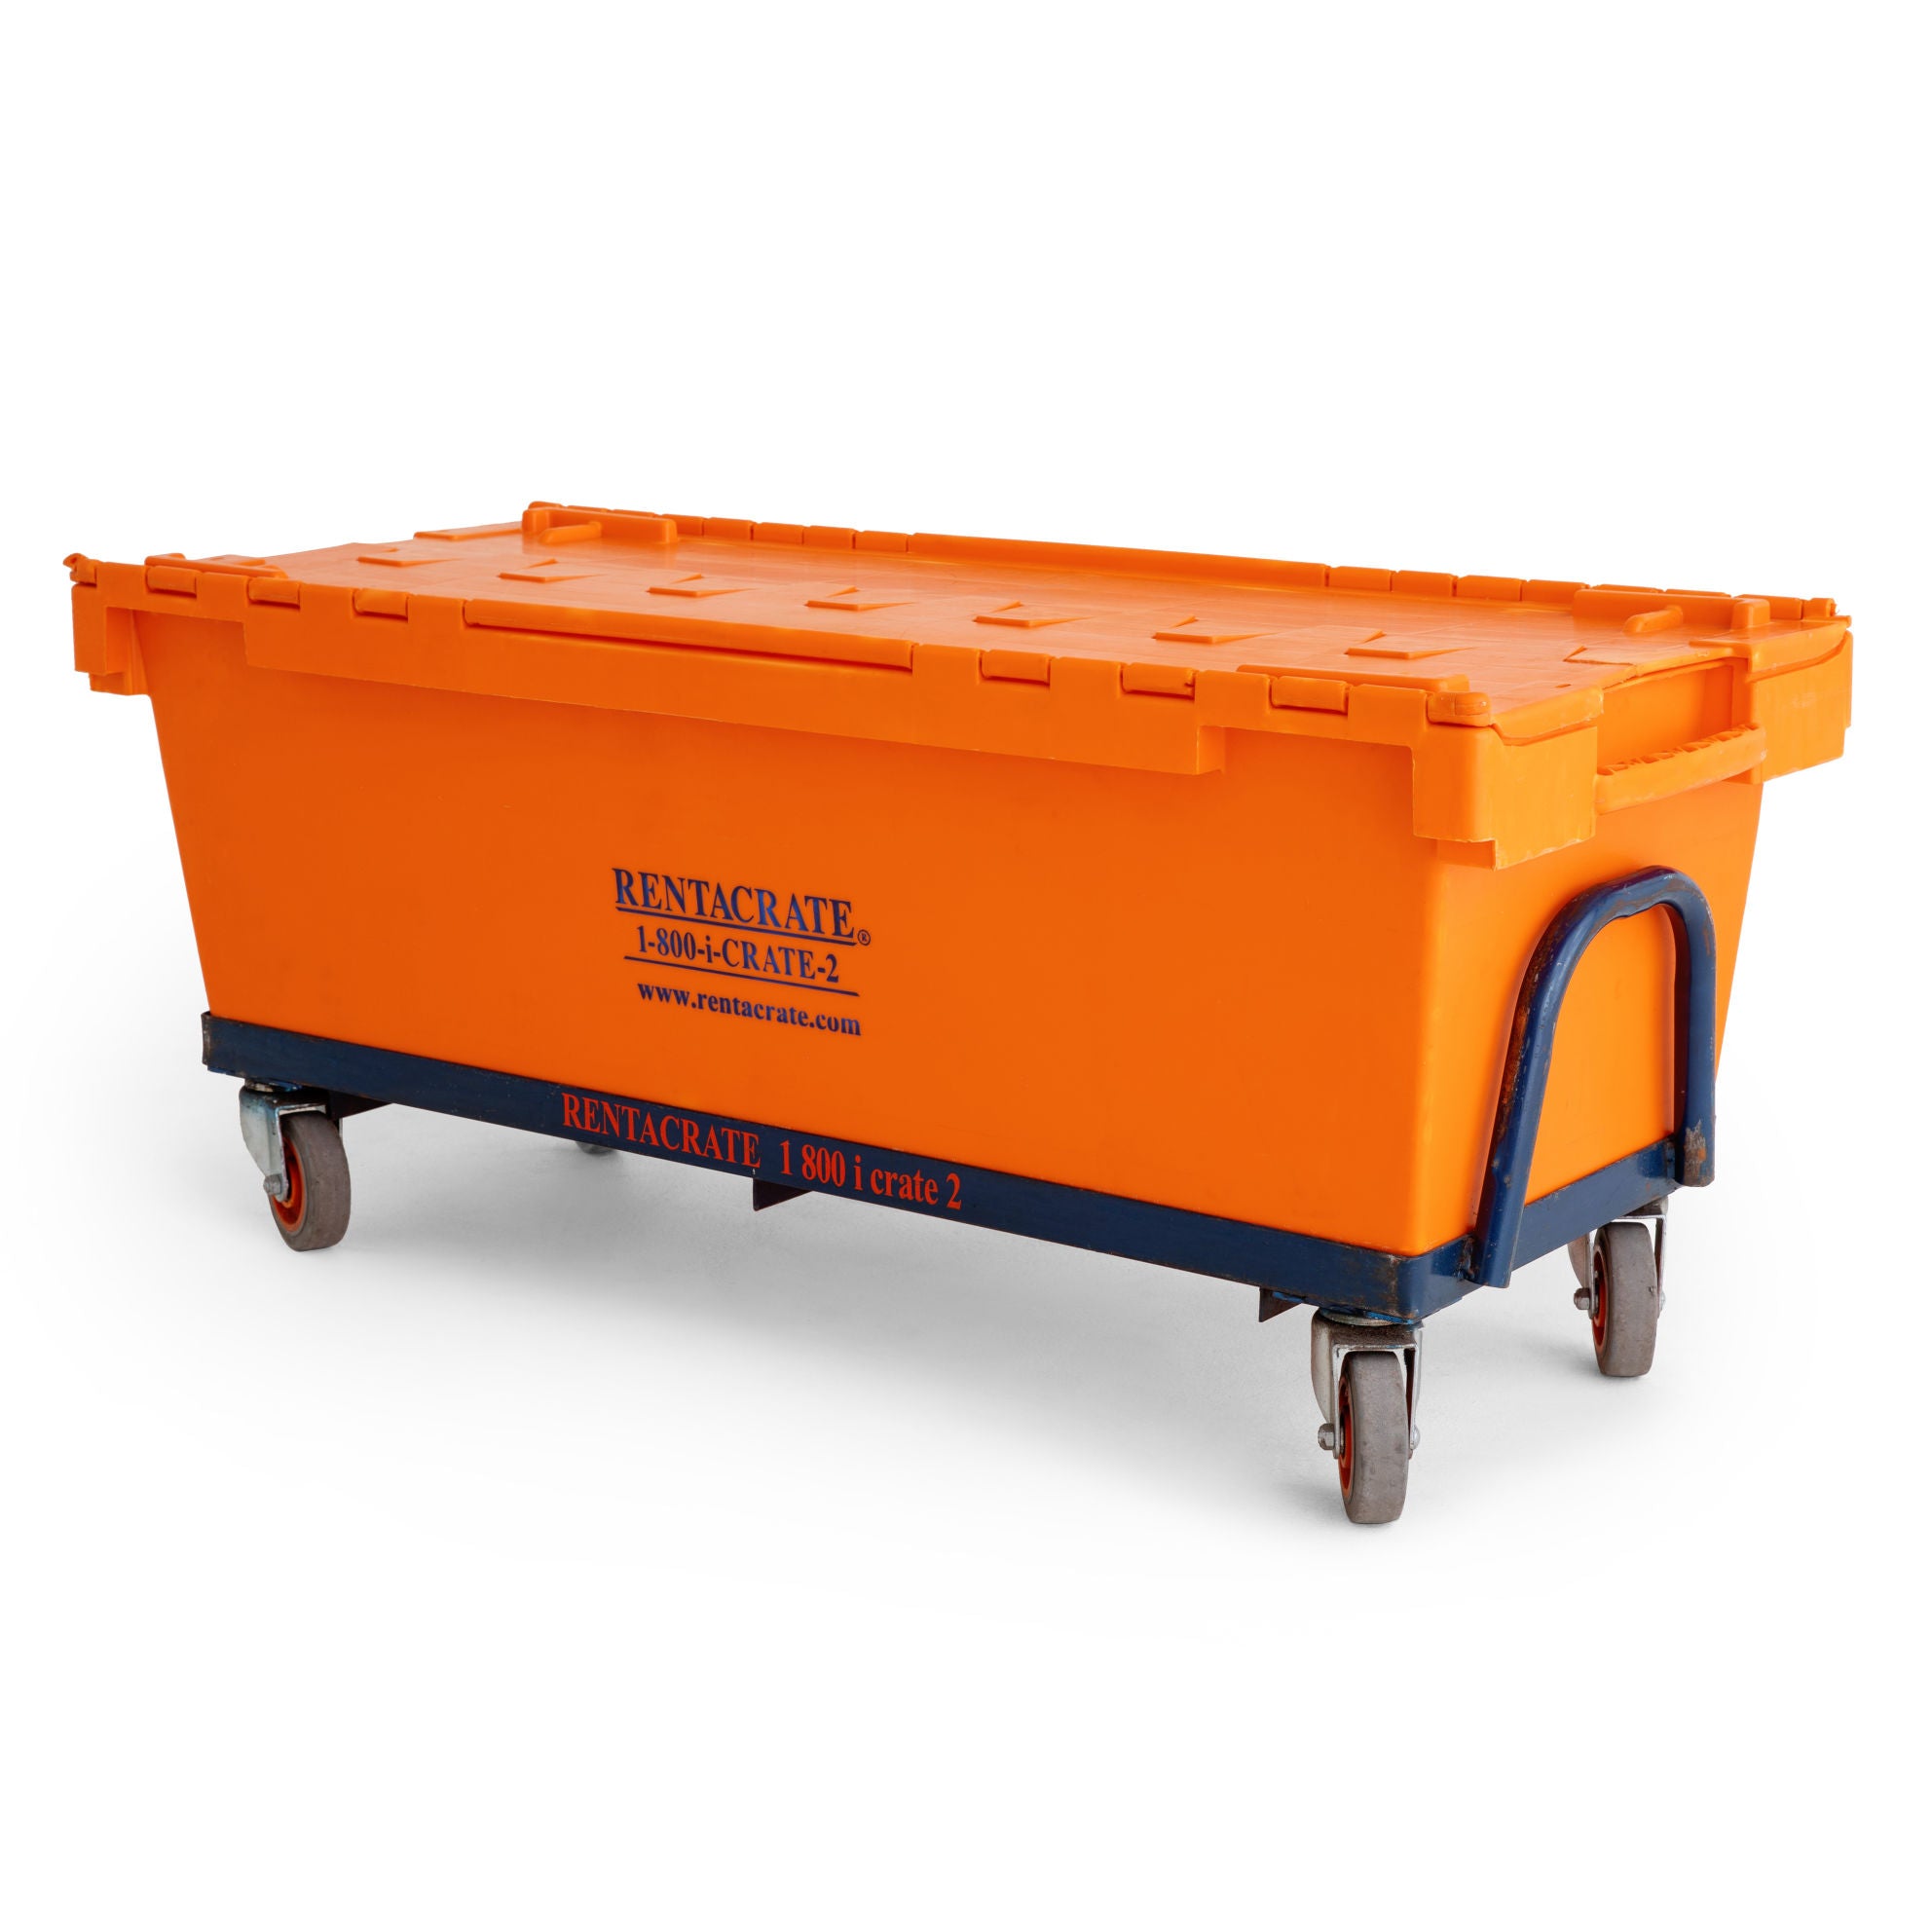 Plastic Moving Bins With Dolly For Plastic Tote Box - Buy Plastic Moving  Bins With Dolly For Plastic Tote Box Product on